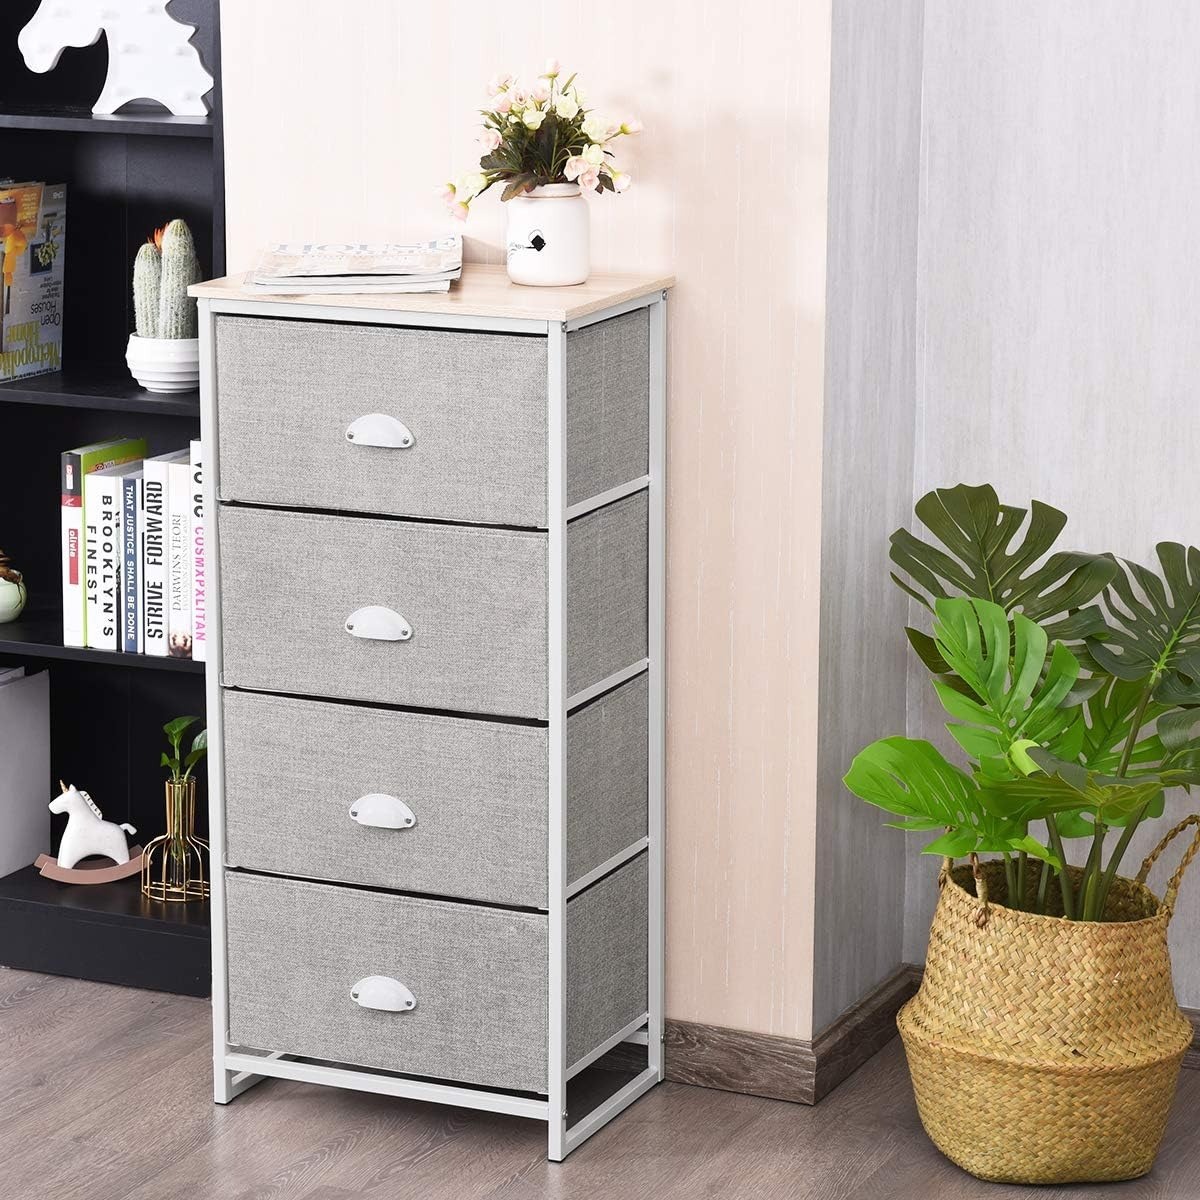 Giantex Fabric Dresser w/ 4 Drawers& Wood Top (Black) $26.40 & More + Free Shipping w/ Prime or orders $35+